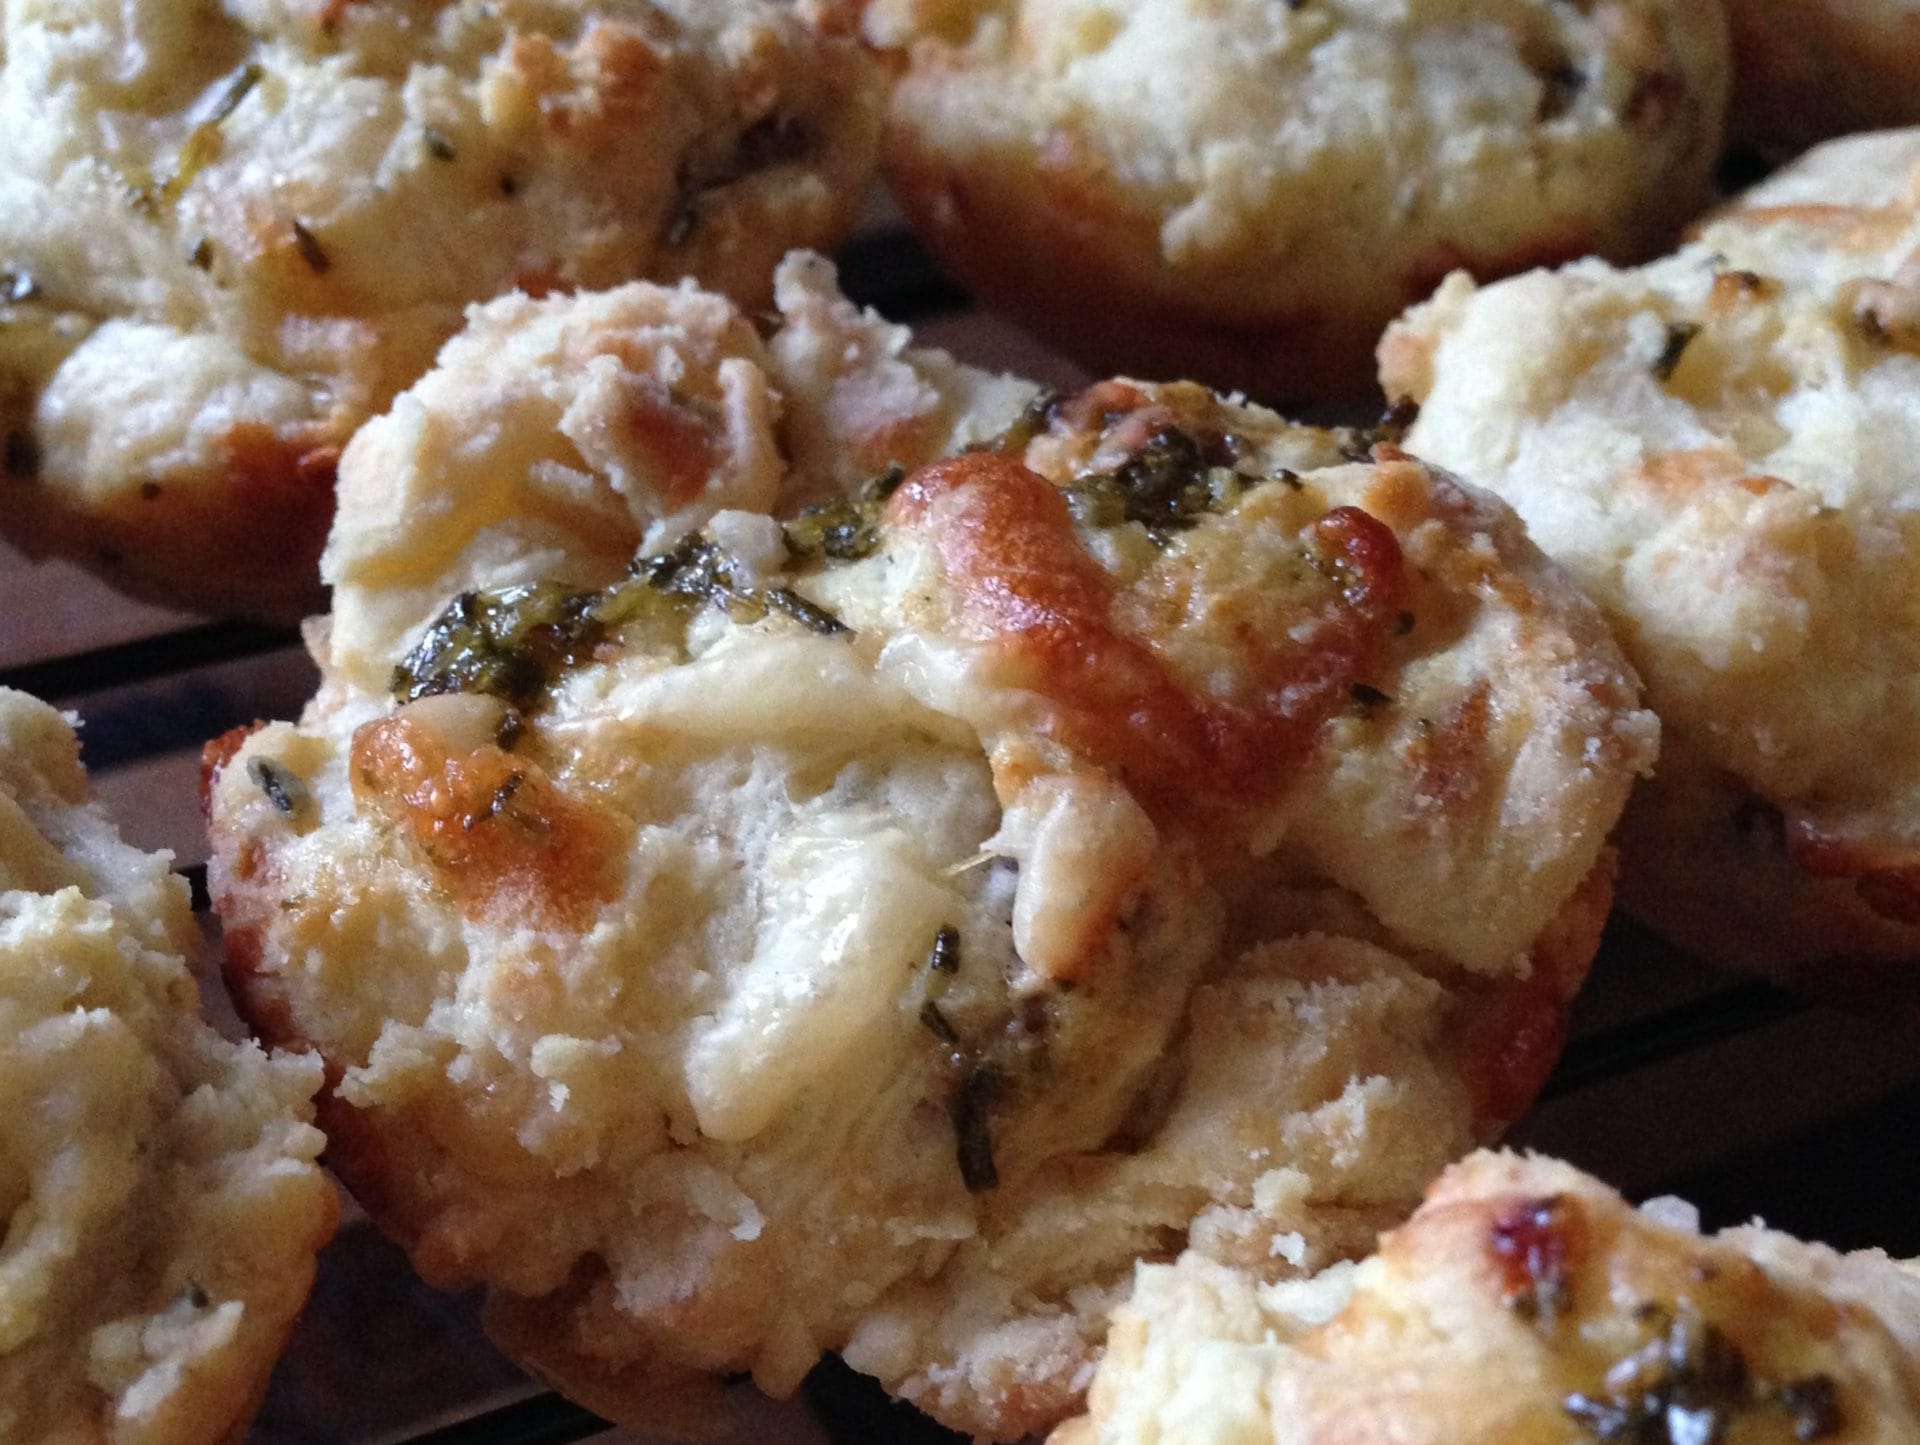 Rosemary, Cheddar and Pecan Damper Muffins